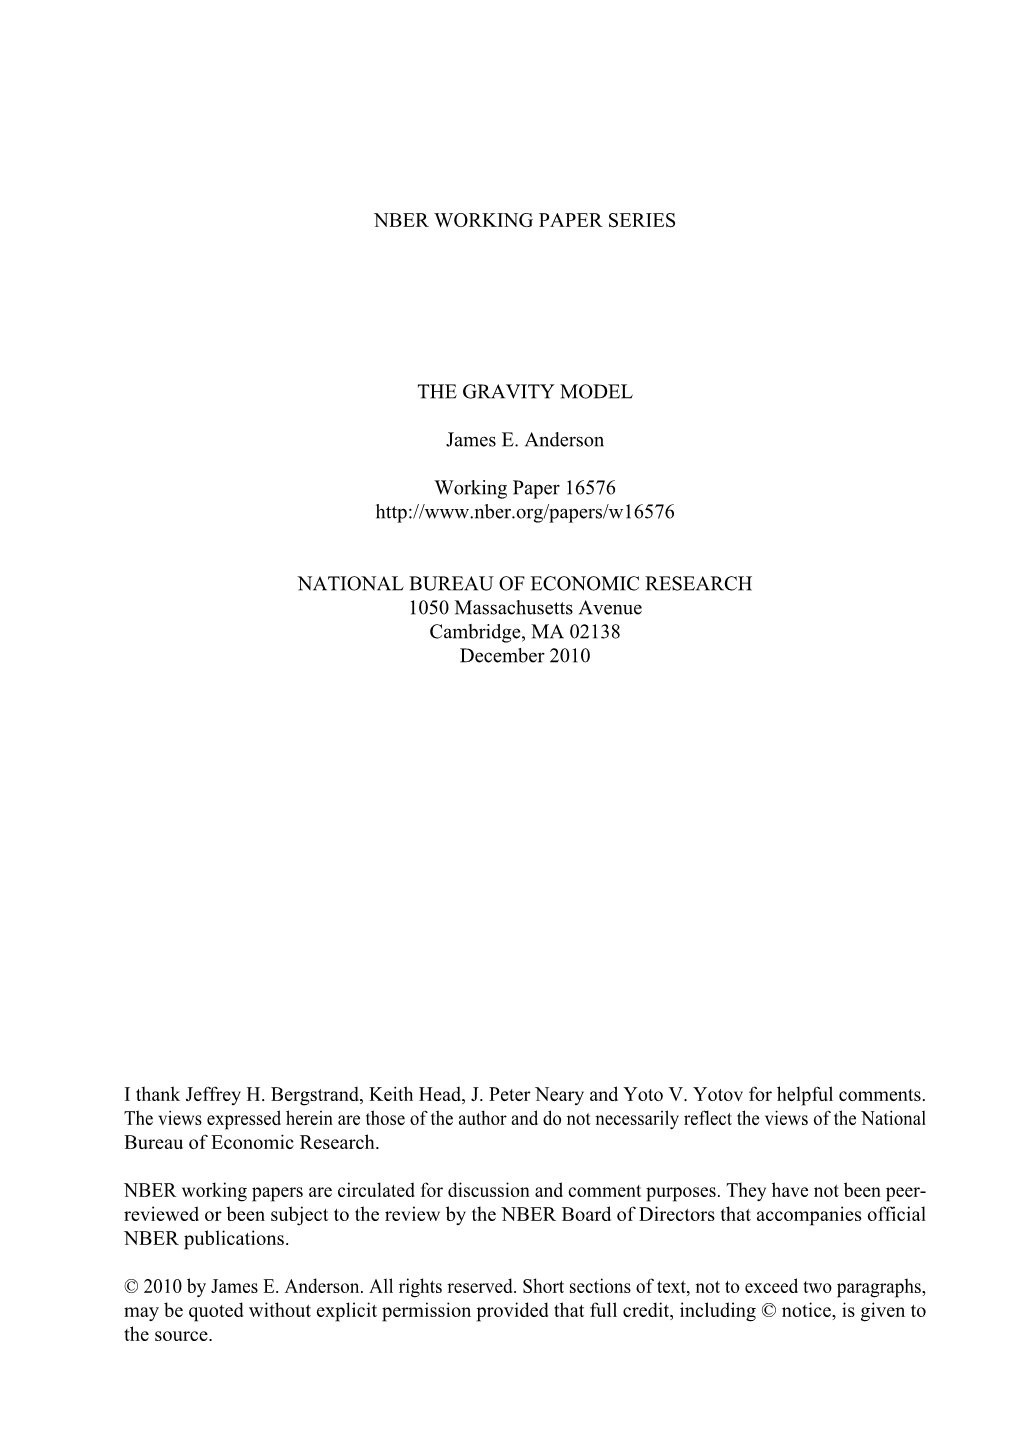 NBER WORKING PAPER SERIES the GRAVITY MODEL James E